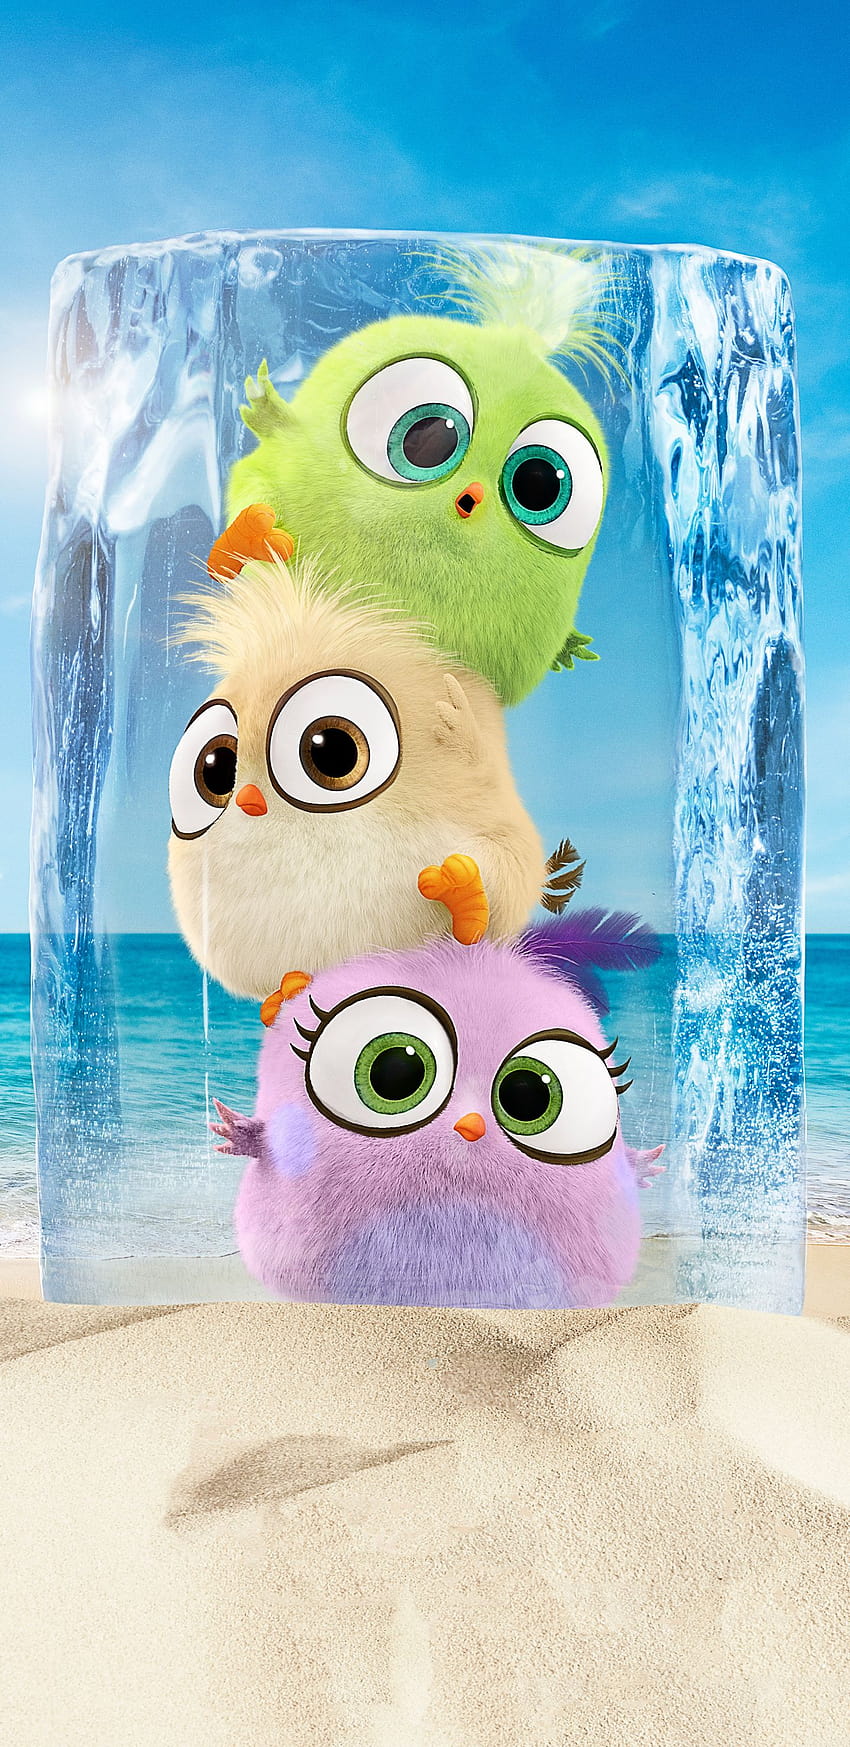 1440x2960 Hatchlings In The Angry Birds Movie 2 Samsung Galaxy Note 9,8, S9,S8,S Q , Backgrounds, and, angry birds cute HD phone wallpaper